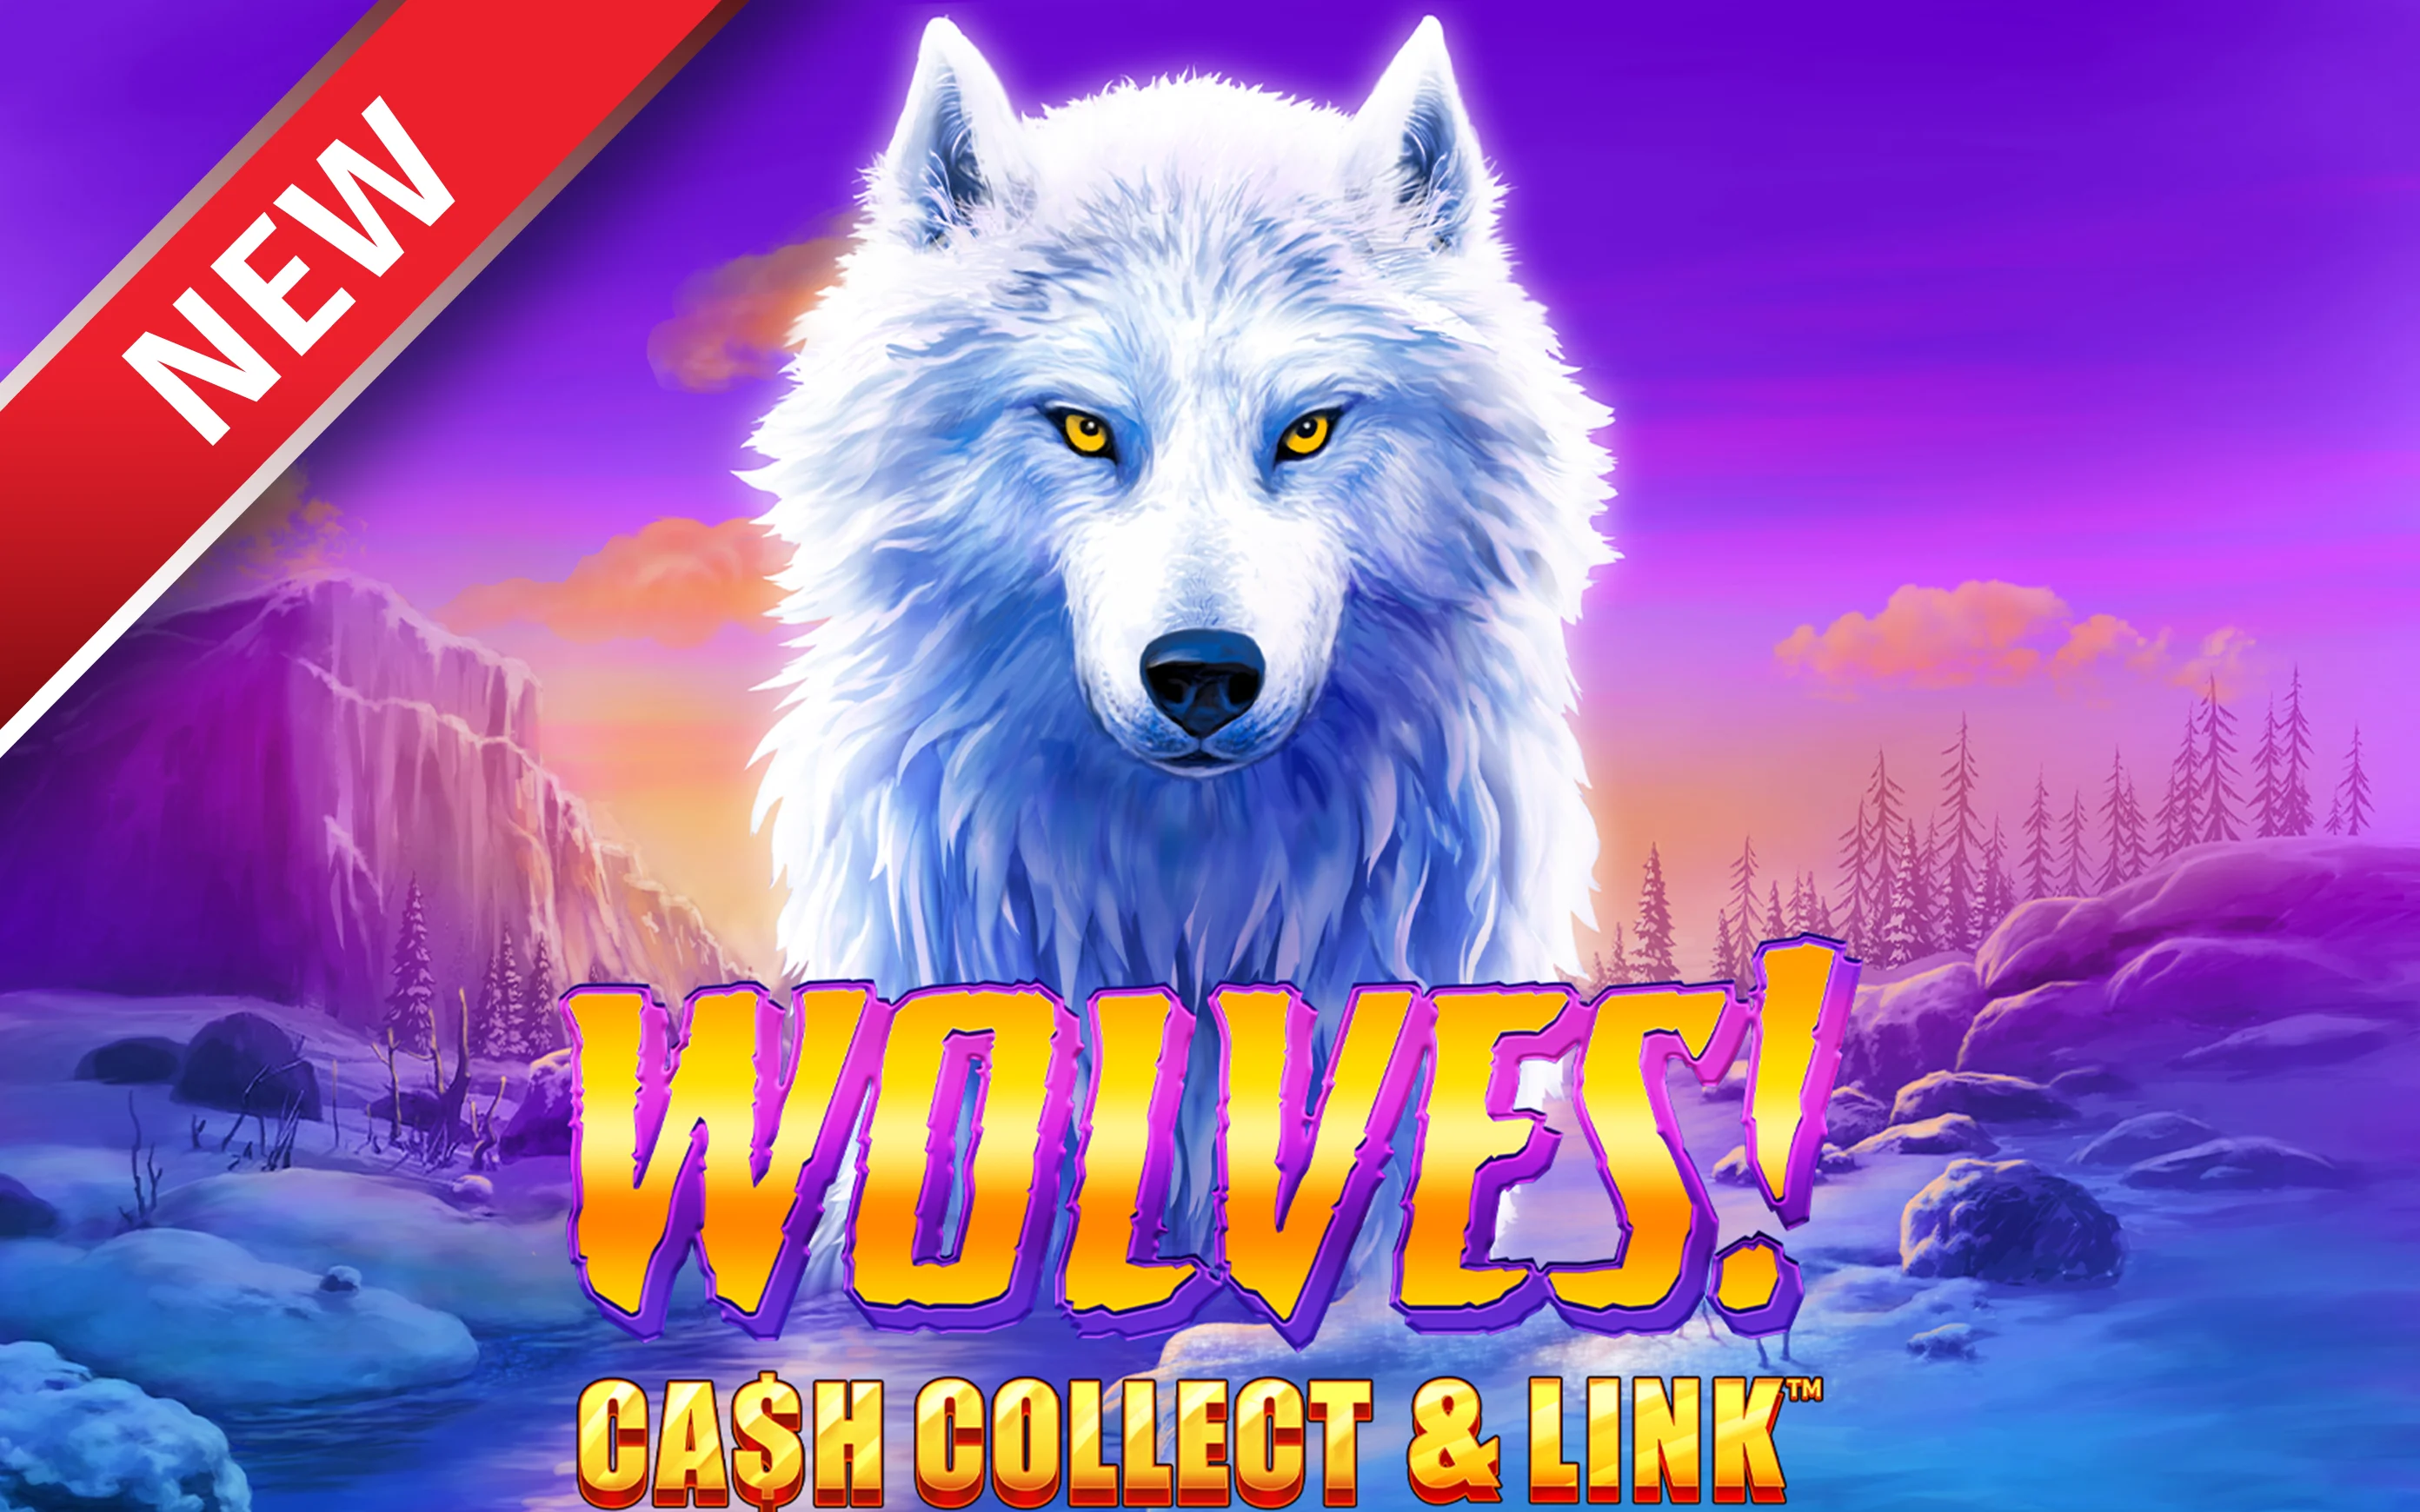 Gioca a Wolves! Cash Collect & Link™ sul casino online Starcasino.be